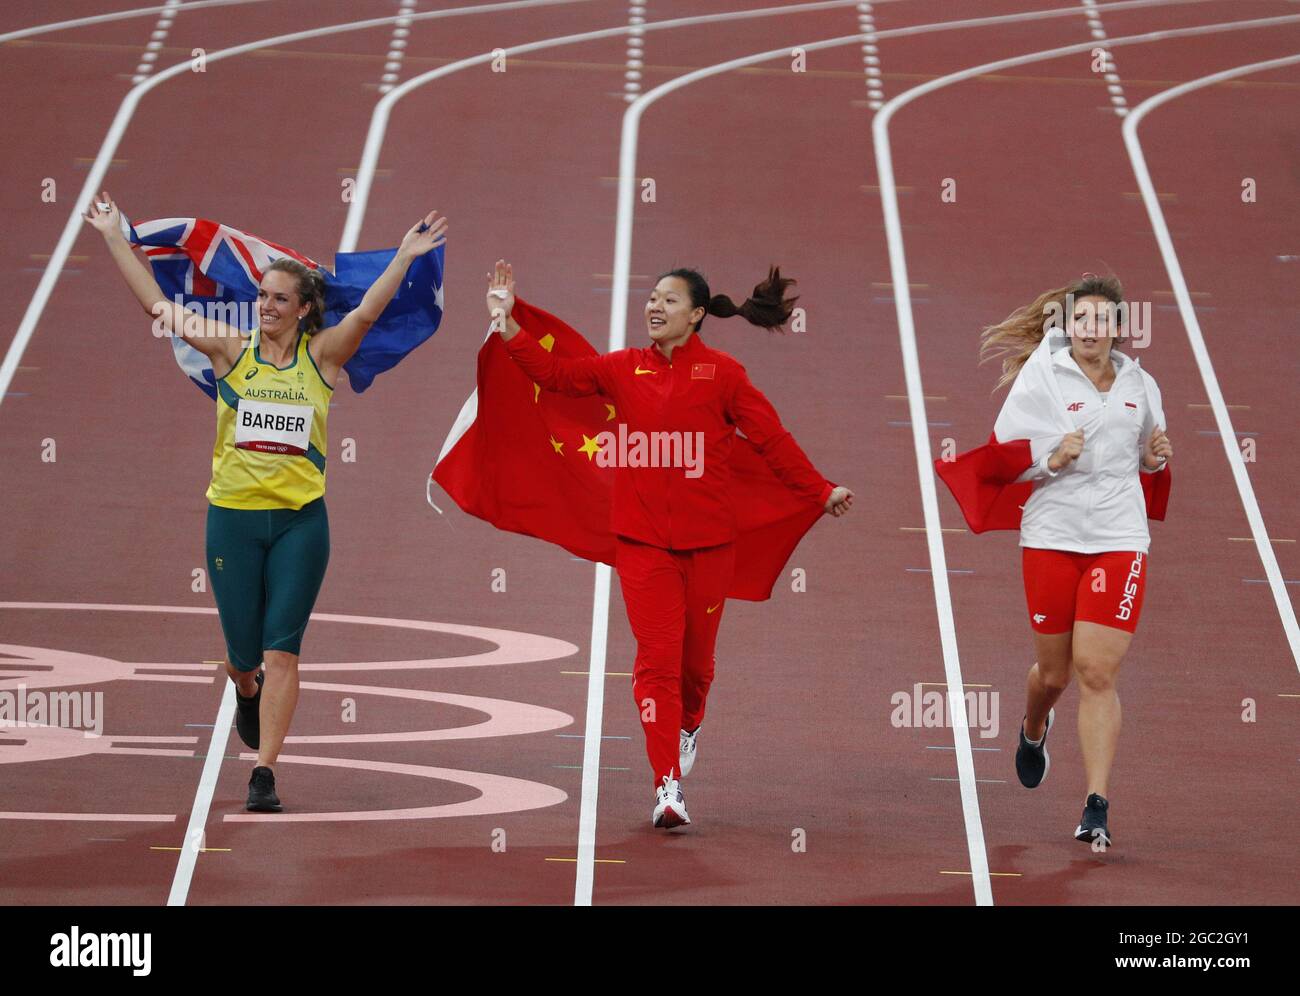 Tokyo, Japan. 06th Aug, 2021. Liu Shiying of China, Maria Andrejczyk of Poland and Kelsey-Lee Barber of Australia celebrate after winning the gold, silver and Bronze medals in the Women's Javelin Throw at the Tokyo 2020 Summer Olympic Games in Tokyo, Japan on Friday, August 6, 2021. Photo by Bob Strong/UPI Credit: UPI/Alamy Live News Stock Photo